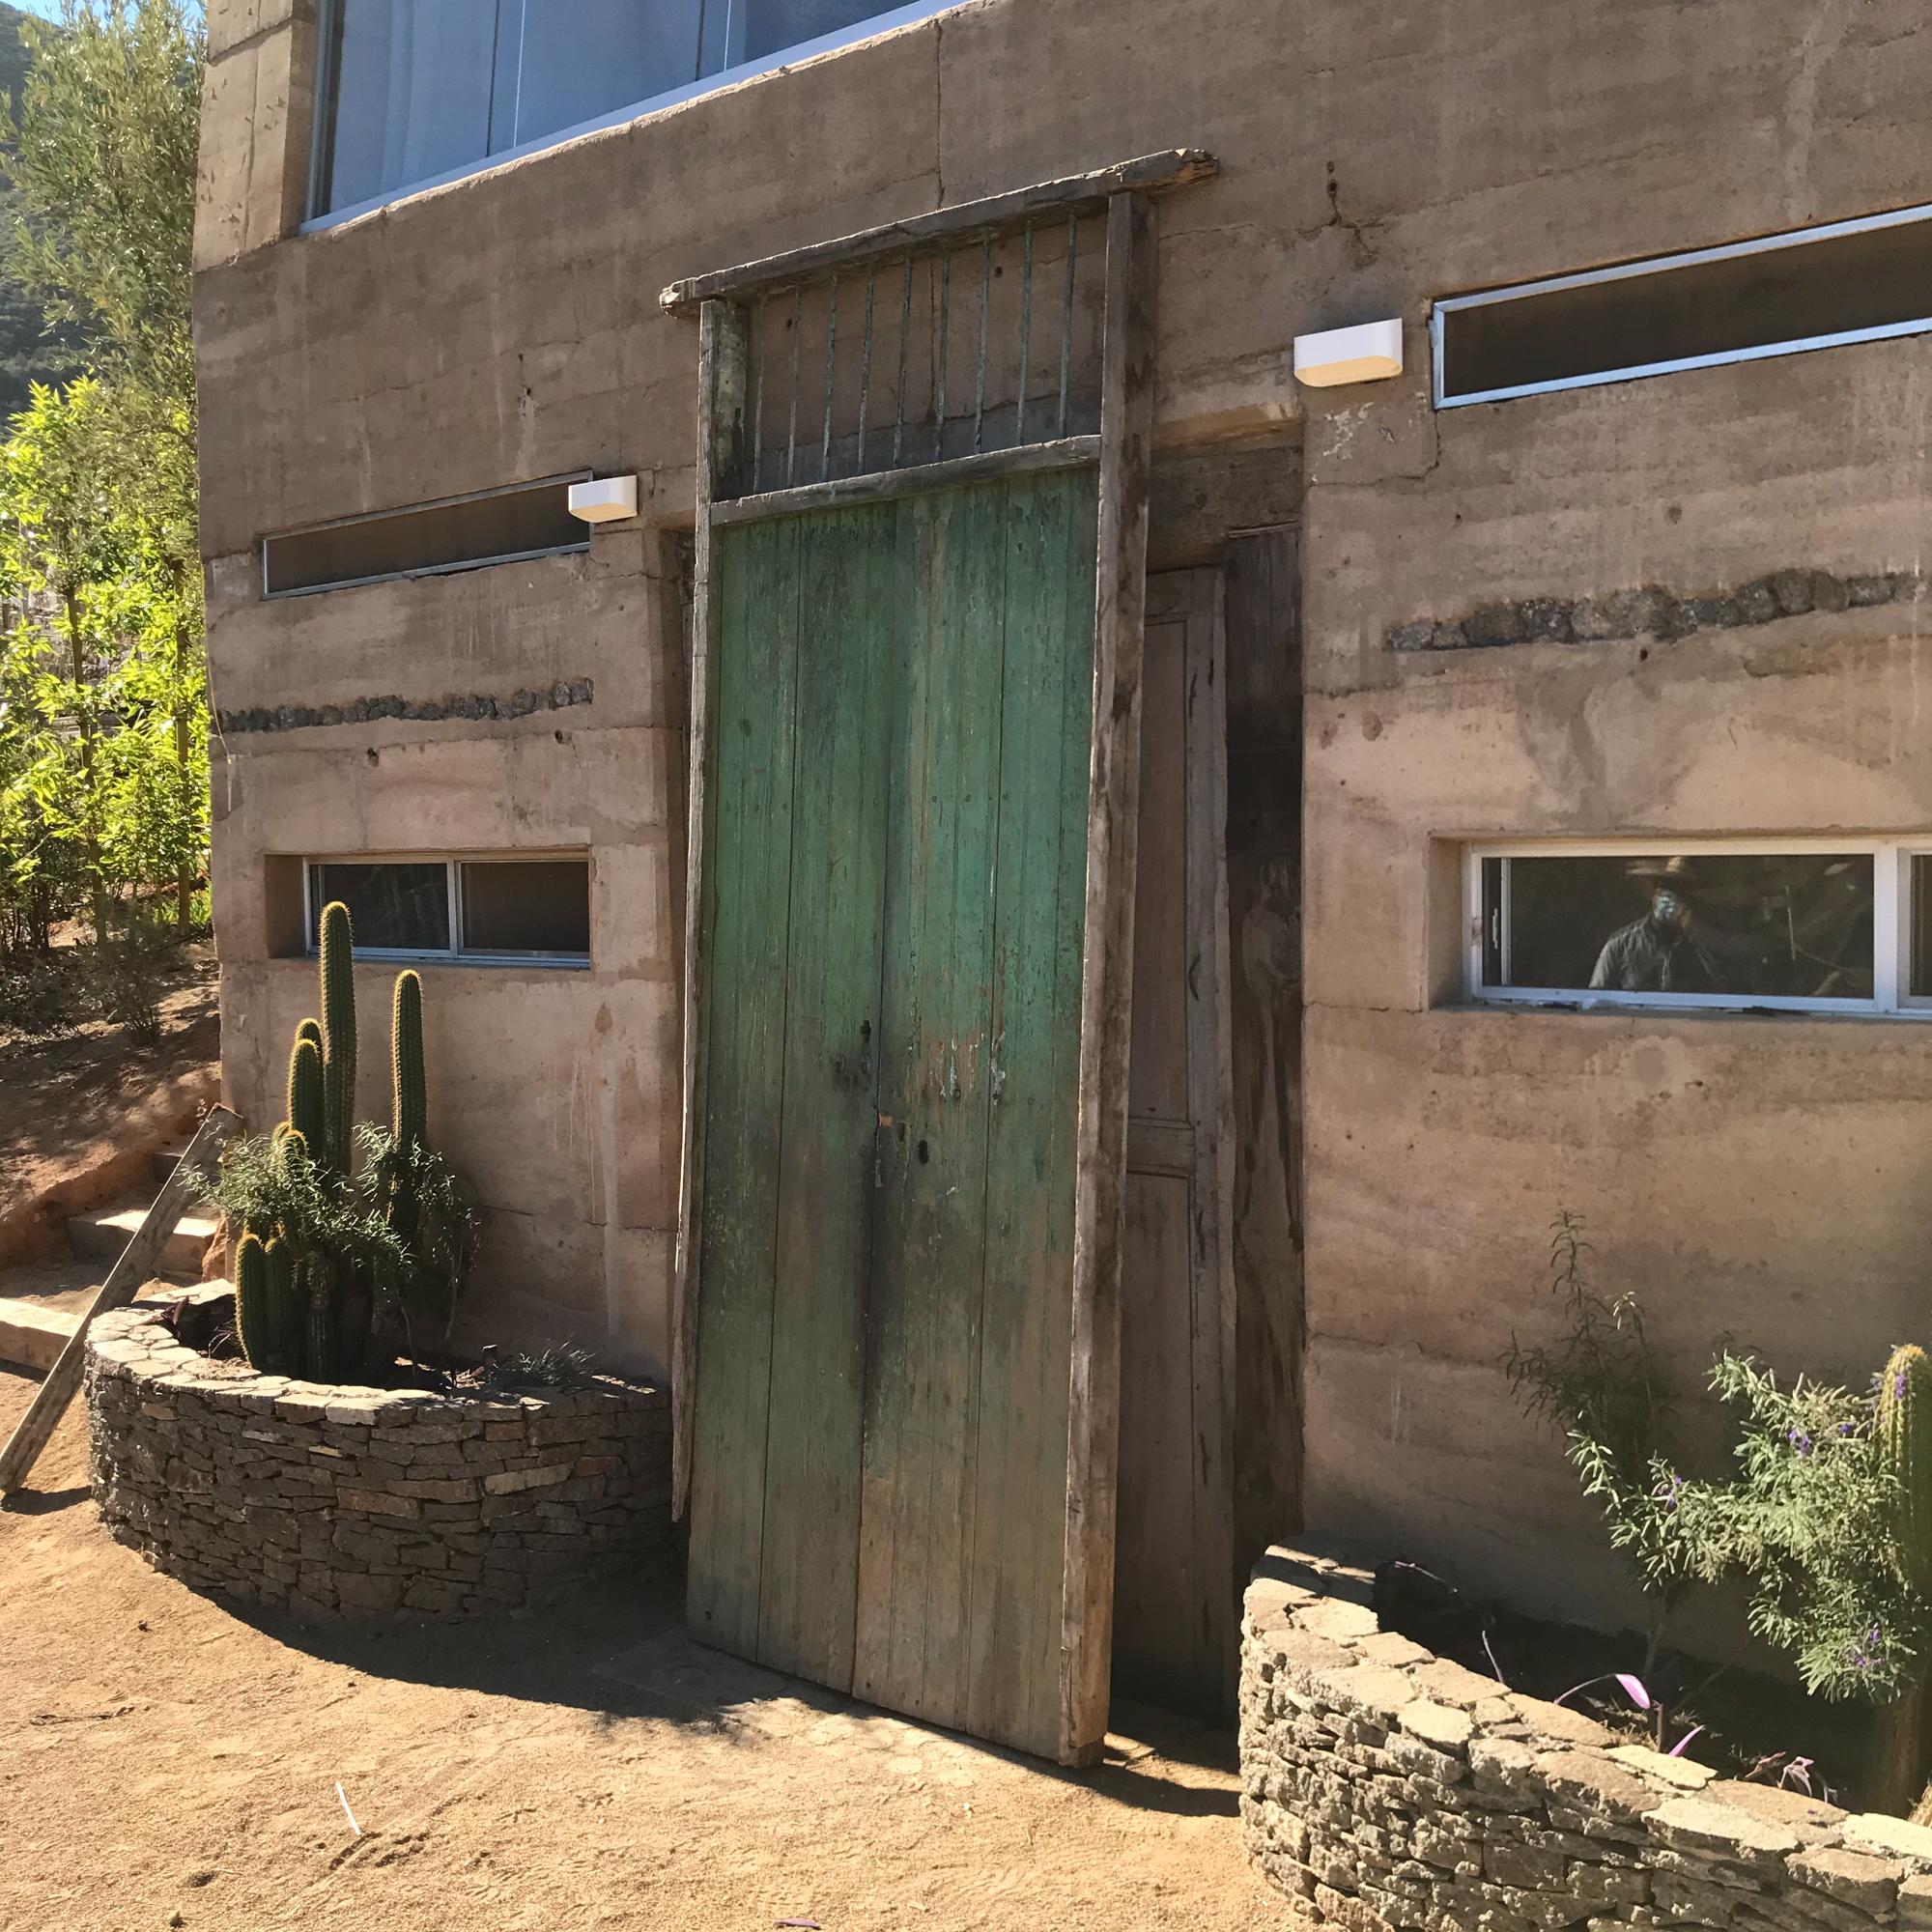 1920s Old Hacienda Rustic Green Barn Doors made in Solid Slab Mesquite Wood Jalisco Mexico 
Handmade by Mexican Artisans
115.5 tall x 44.75 W x 3.75 thick (wood frame), Doors 41 W x 94.5 tall.
An unrestored item in beautifully distressed condition.